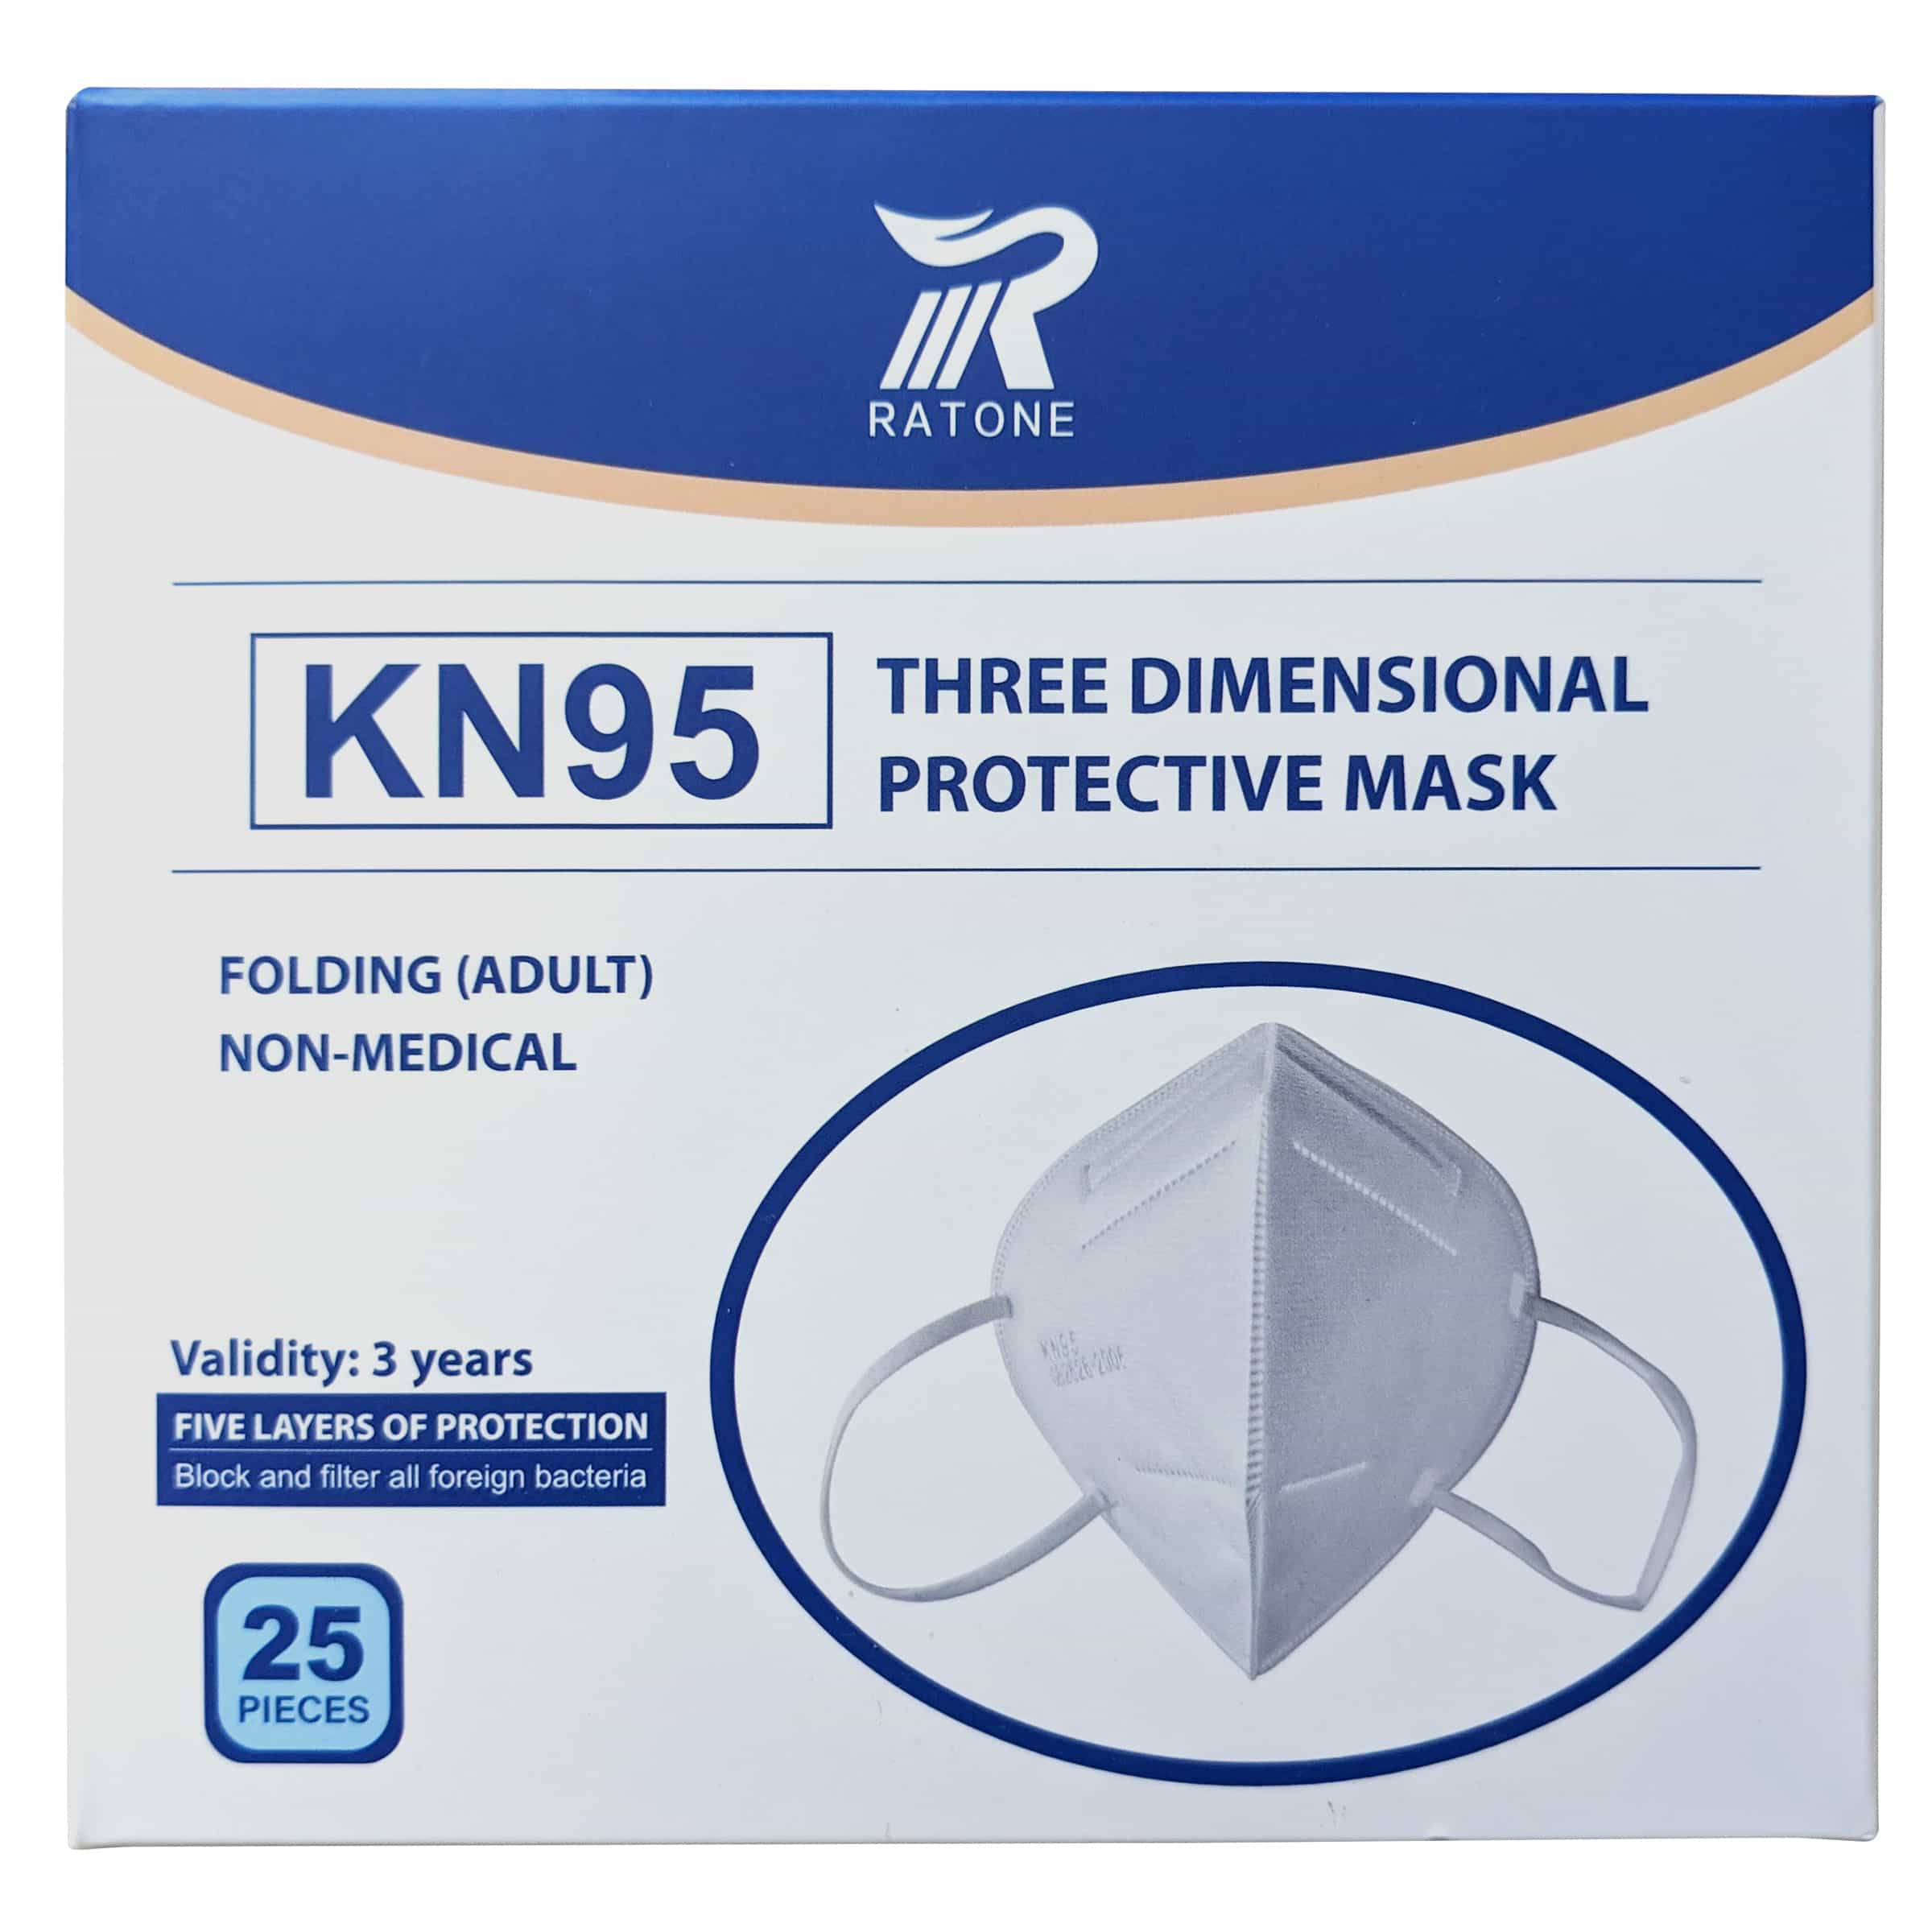 Ratone KN95 Disposable Three Dimensional Protective 5 Layer Face Mask, Disposable, White